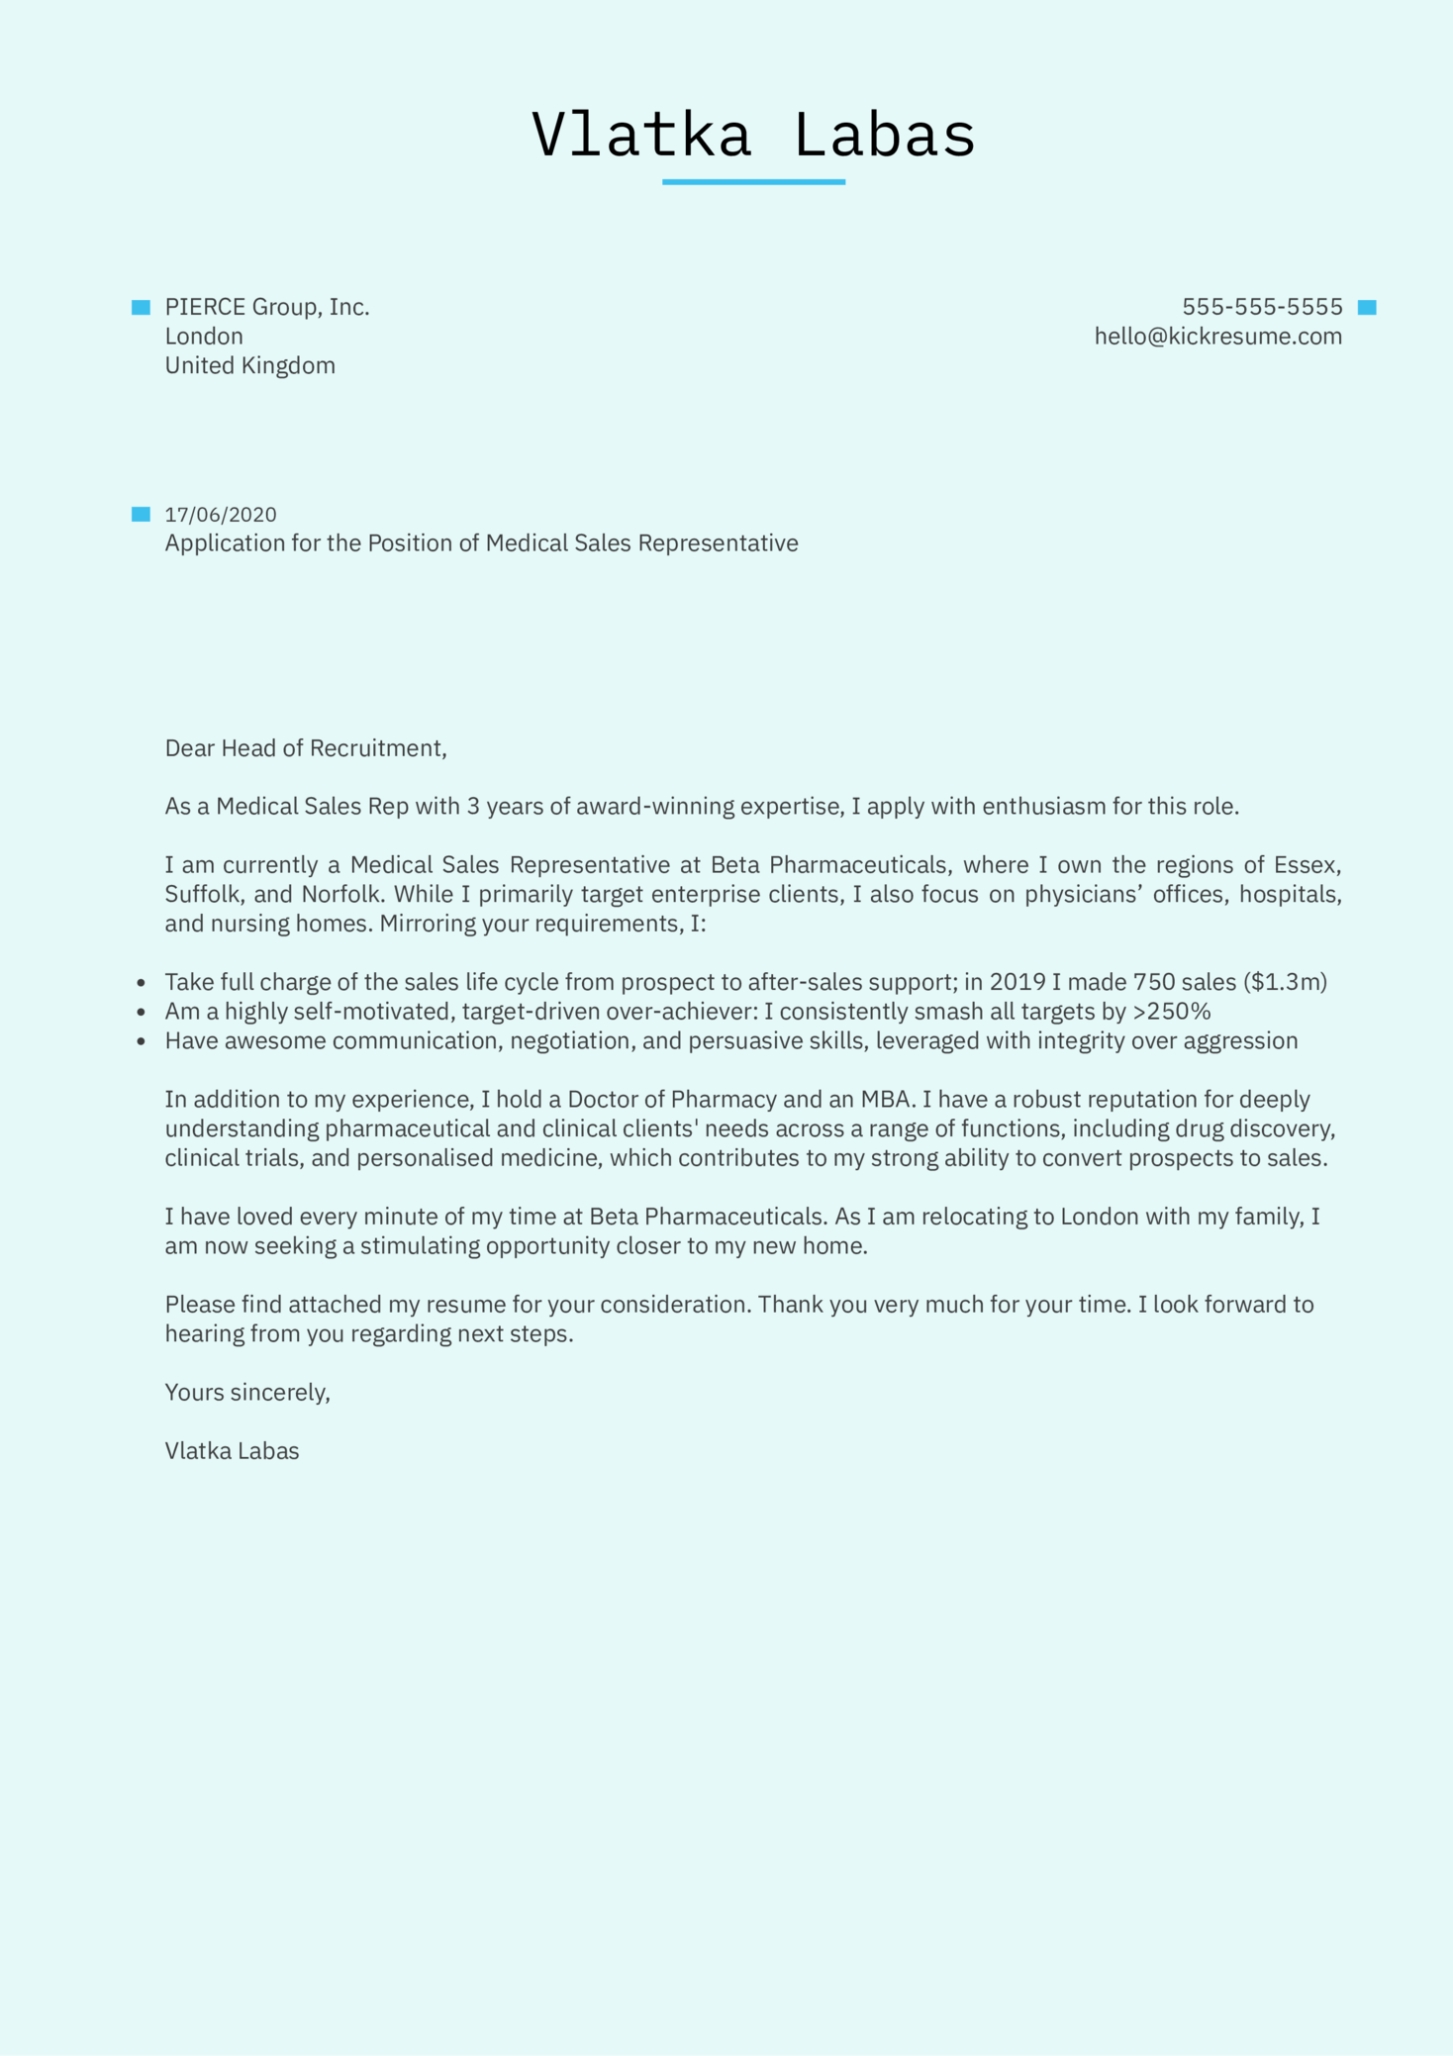 Medical Sales Representative Cover Letter Example | Kickresume In Letter To Congressman Template